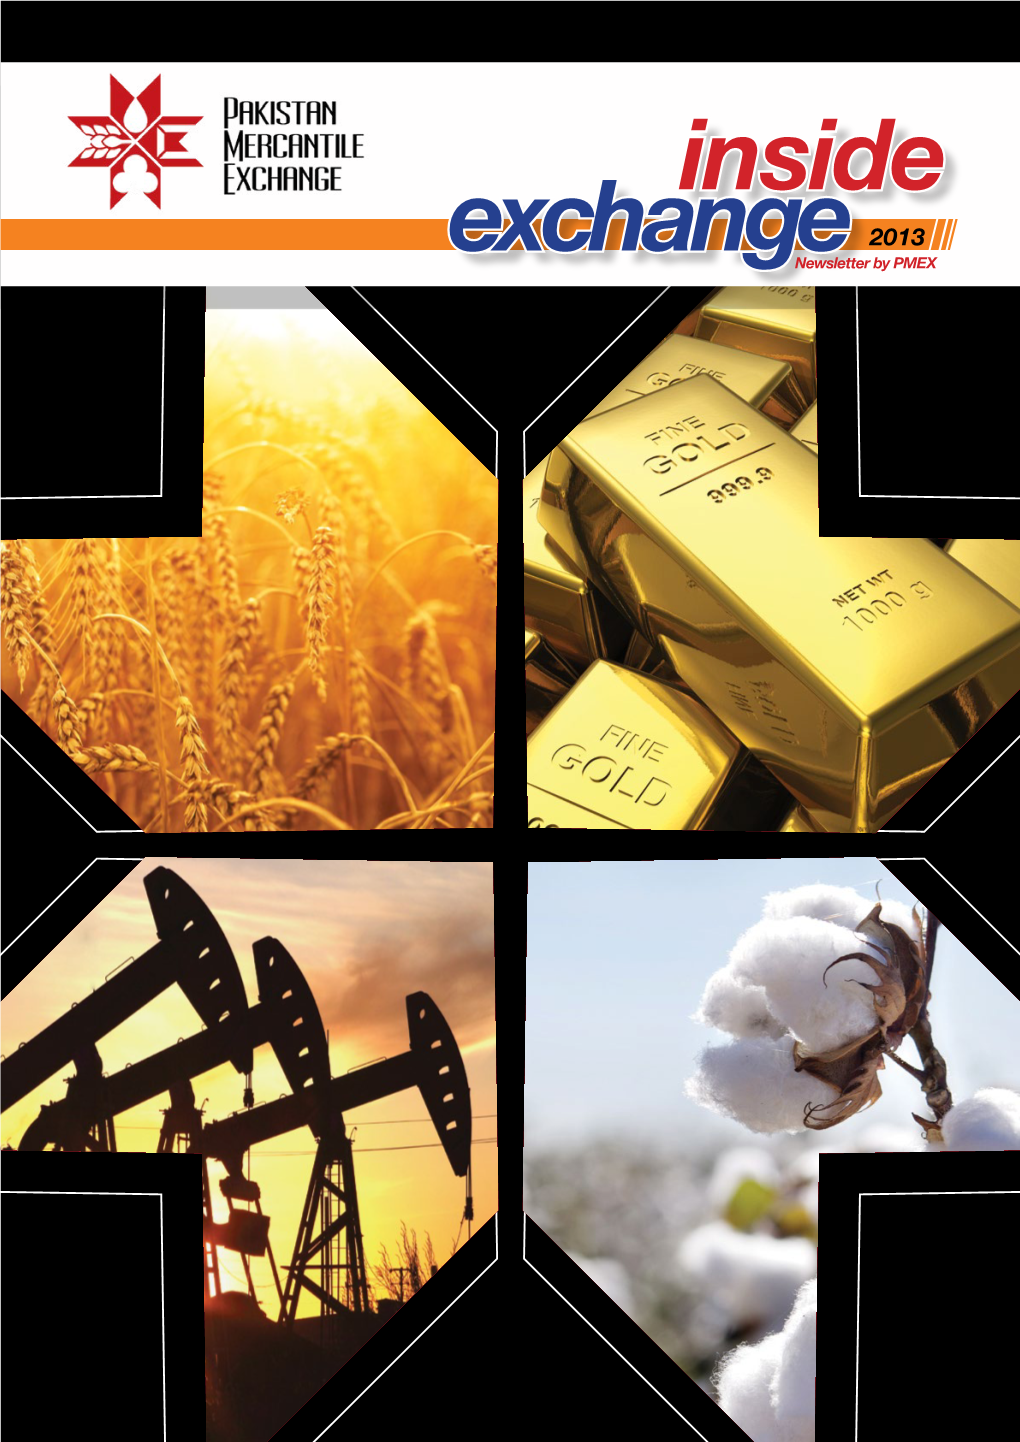 Inside 2013 Exchangenewsletter by PMEX Contents